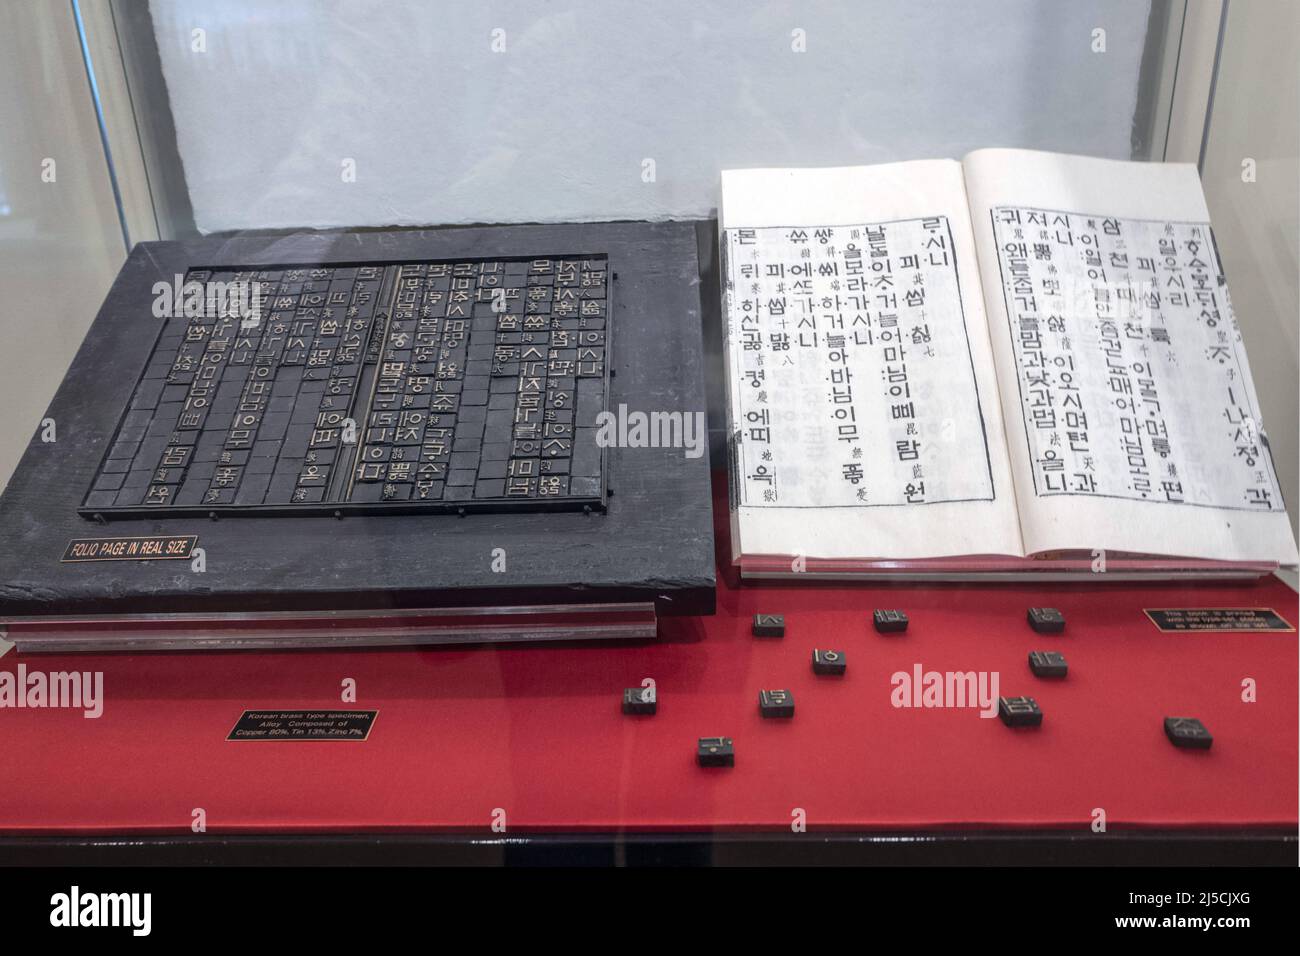 USA, New York, Oct. 07, 2019. objects on display at the United Nations Headquarters in New York on Oct. 07, 2019. The world's first movable metal type was invented in Korea in the 13th century, 200 years before Johannes Gutenberg. The movable metal type typesetting plate on display is a restoration of the plate used to print Wol-In-Chon-Kang-Ji-Kok (The Moon is Printed on a Thousand Fluids), an epic poem written in Hangul (the Korean alphabet) in 1446 by King Sejong the Great, who himself created the Korean alphabet. The book is a copy of the first volume of Wol-In-Chon-Kang-Ji-Kok. The Stock Photo